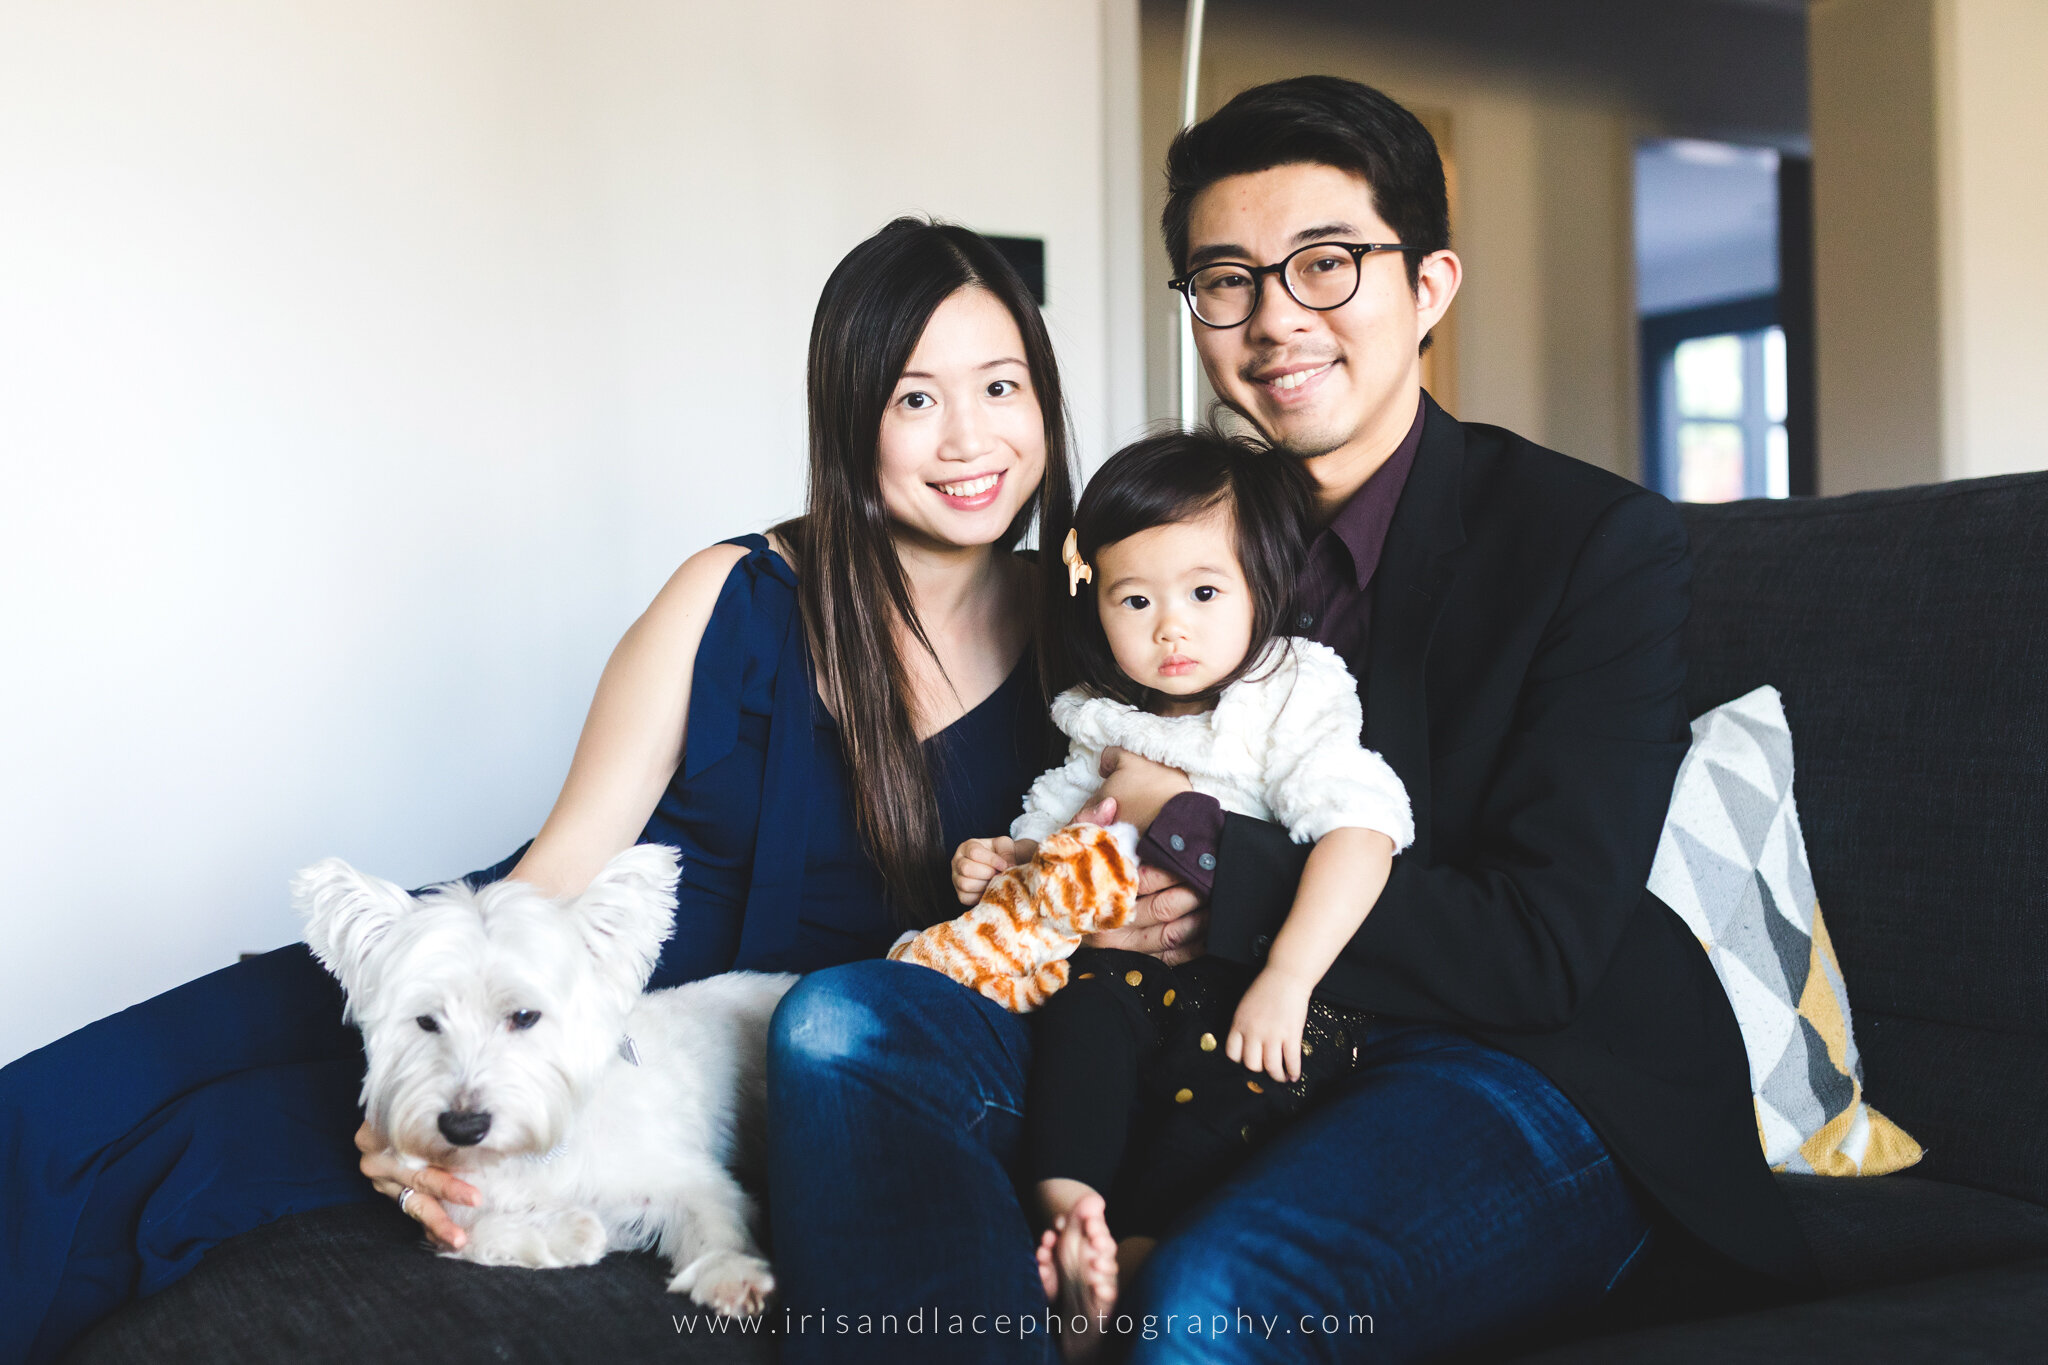 Menlo Park Family Lifestyle Photography  |  Iris and Lace Photography  |  Northern California Family Photos